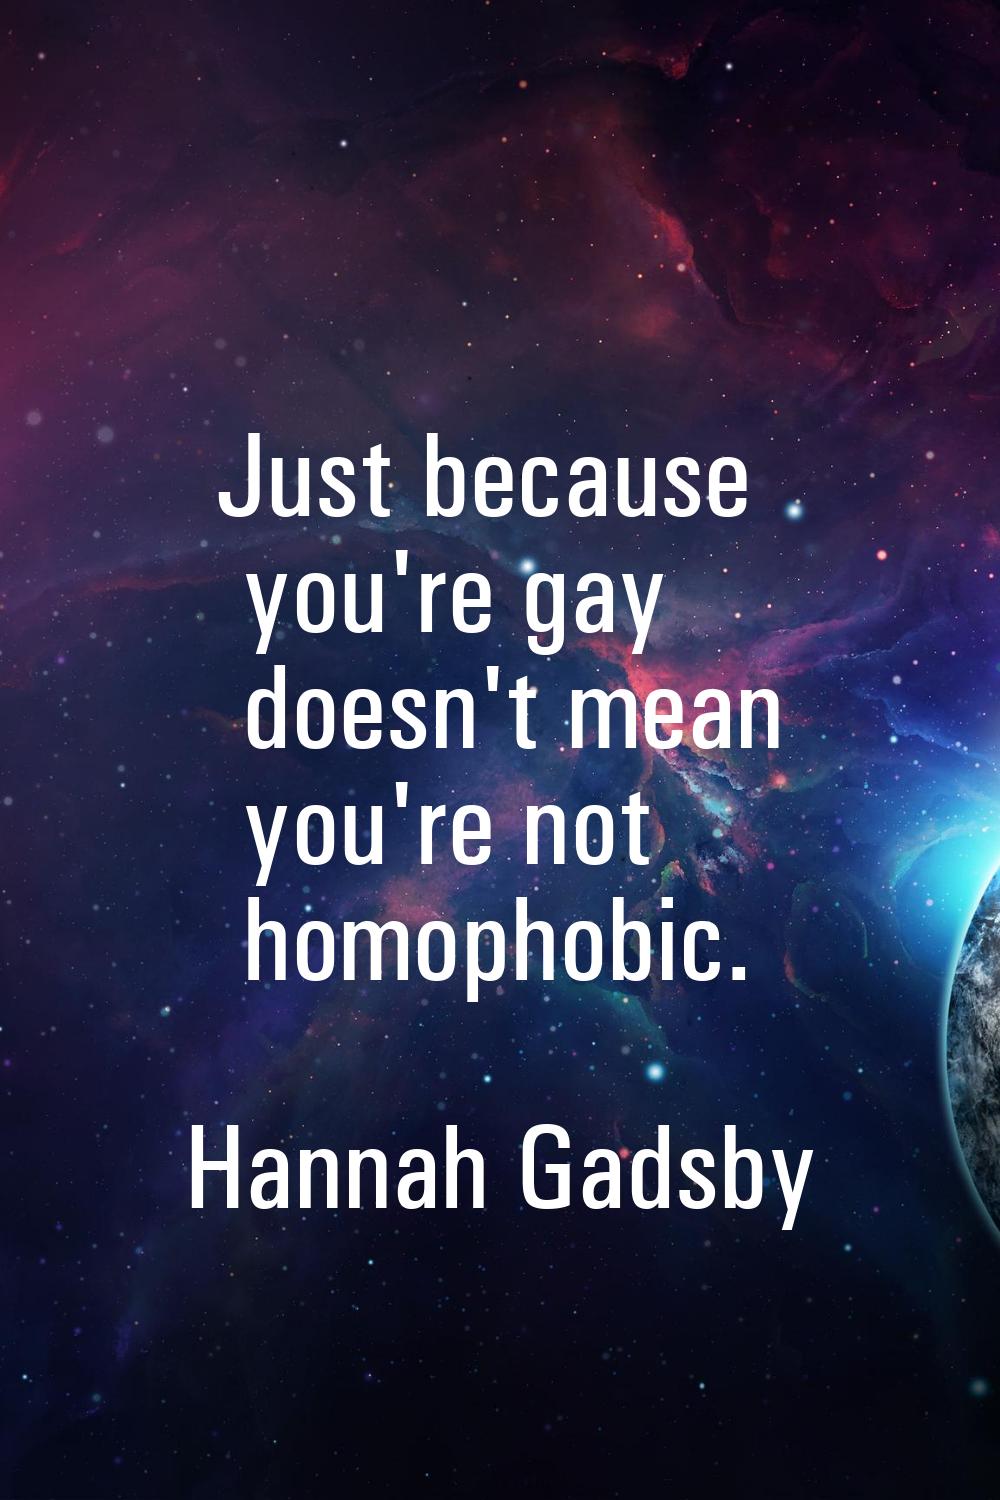 Just because you're gay doesn't mean you're not homophobic.